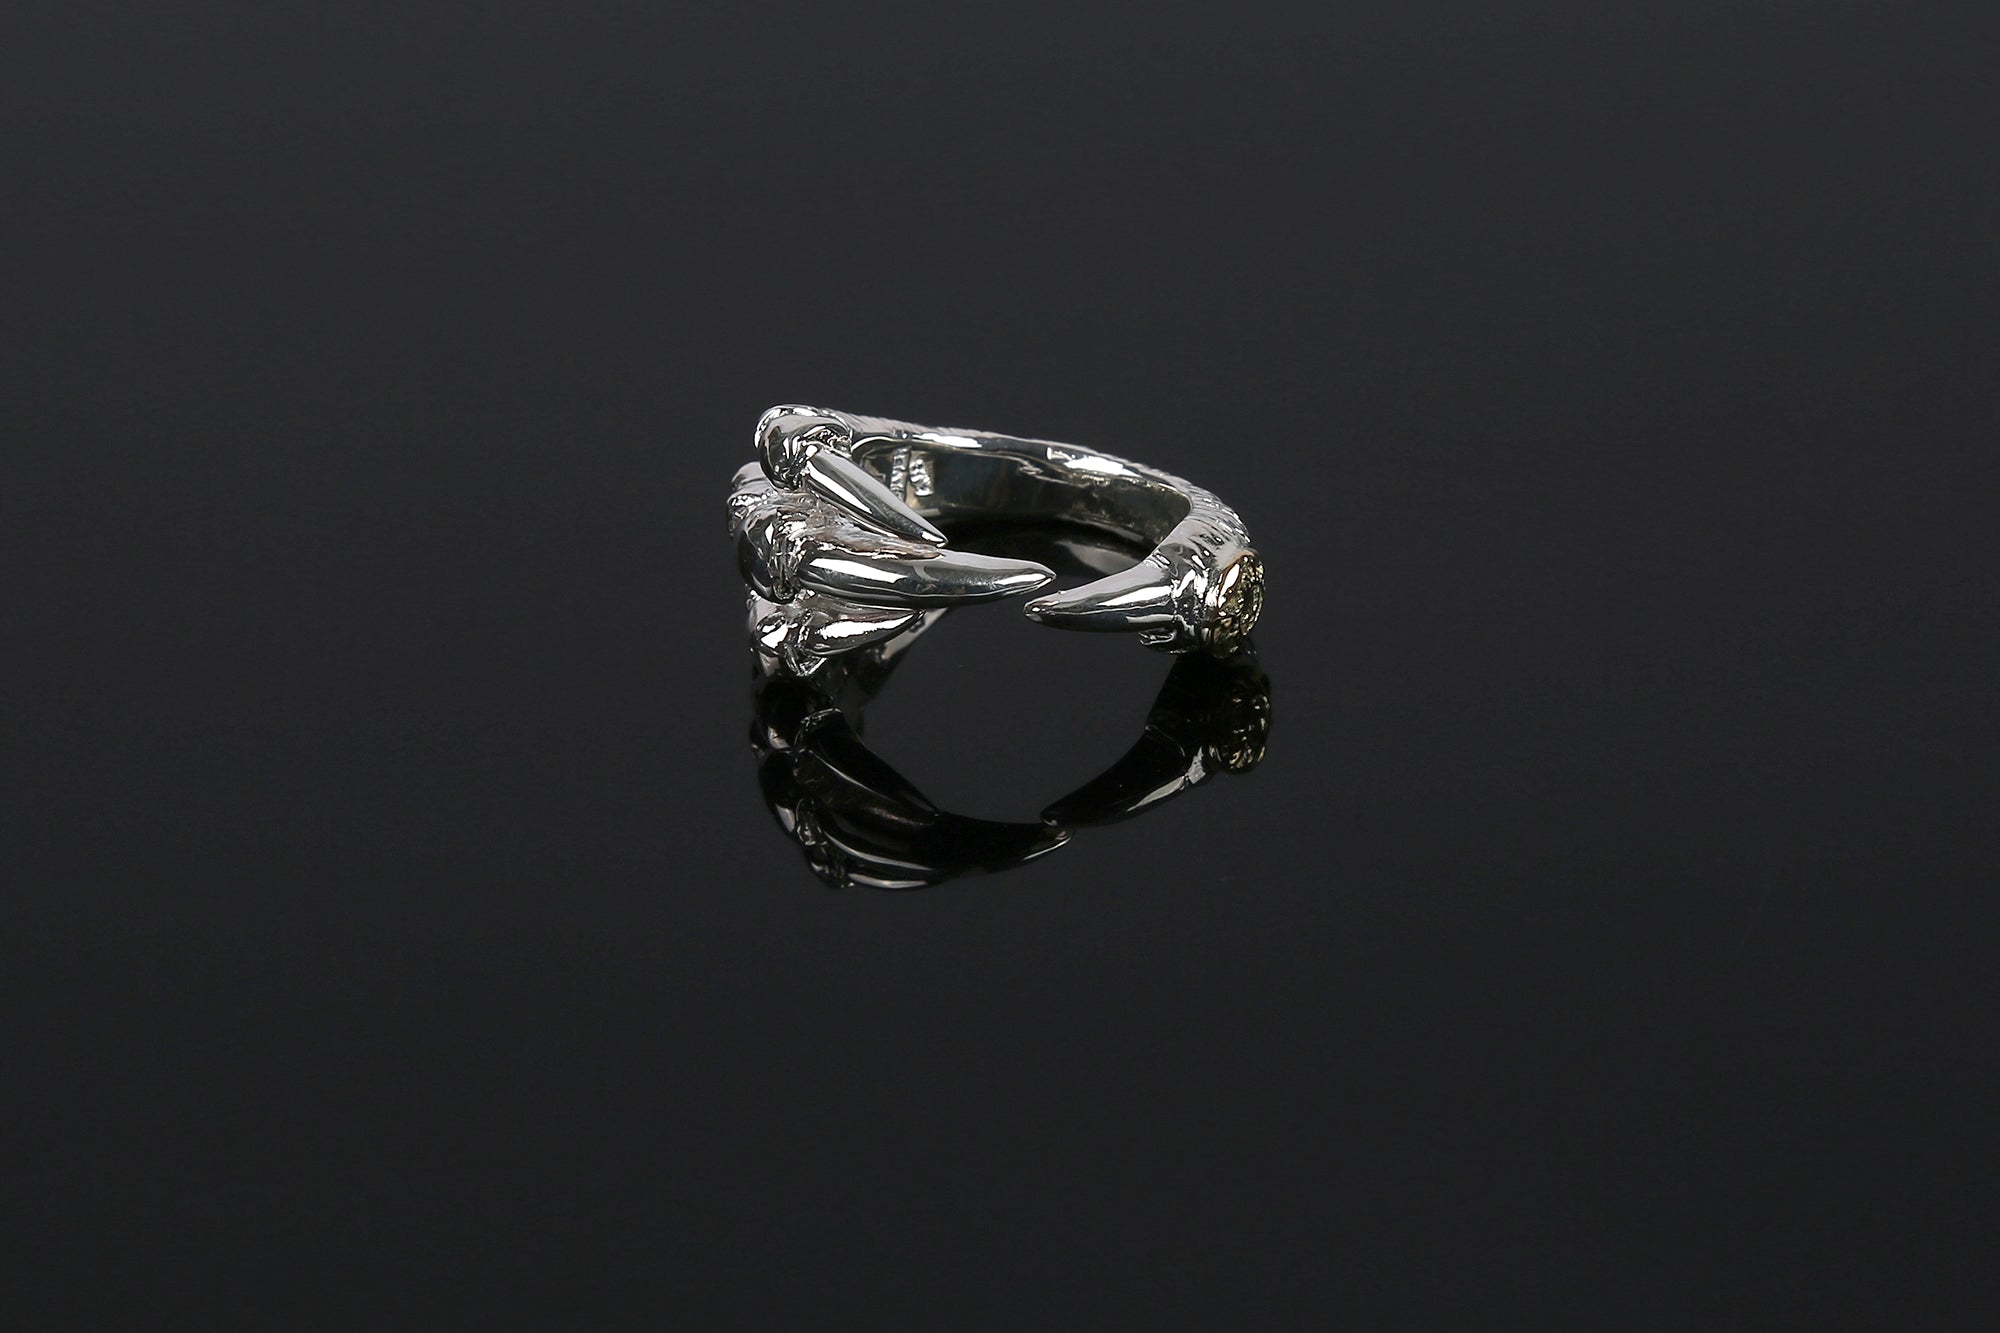 First Arrow's ‘Eagle Claw’ Ring With 18K Gold Emblem